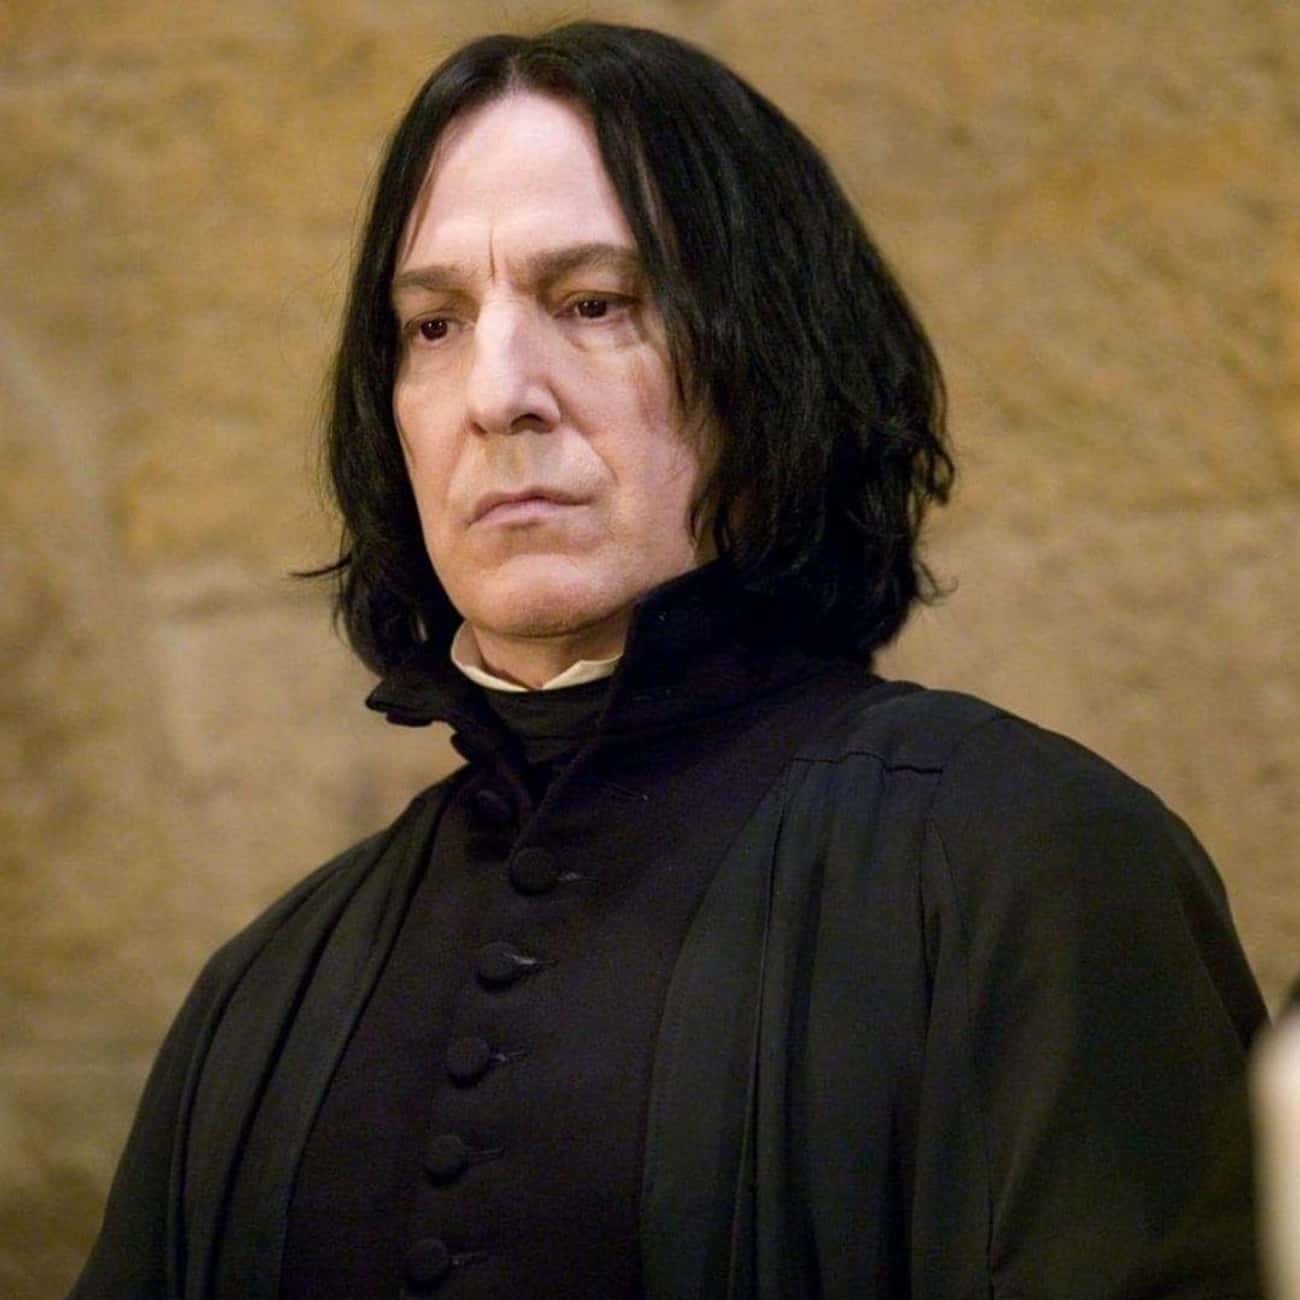 Snape In The Movies: Pale